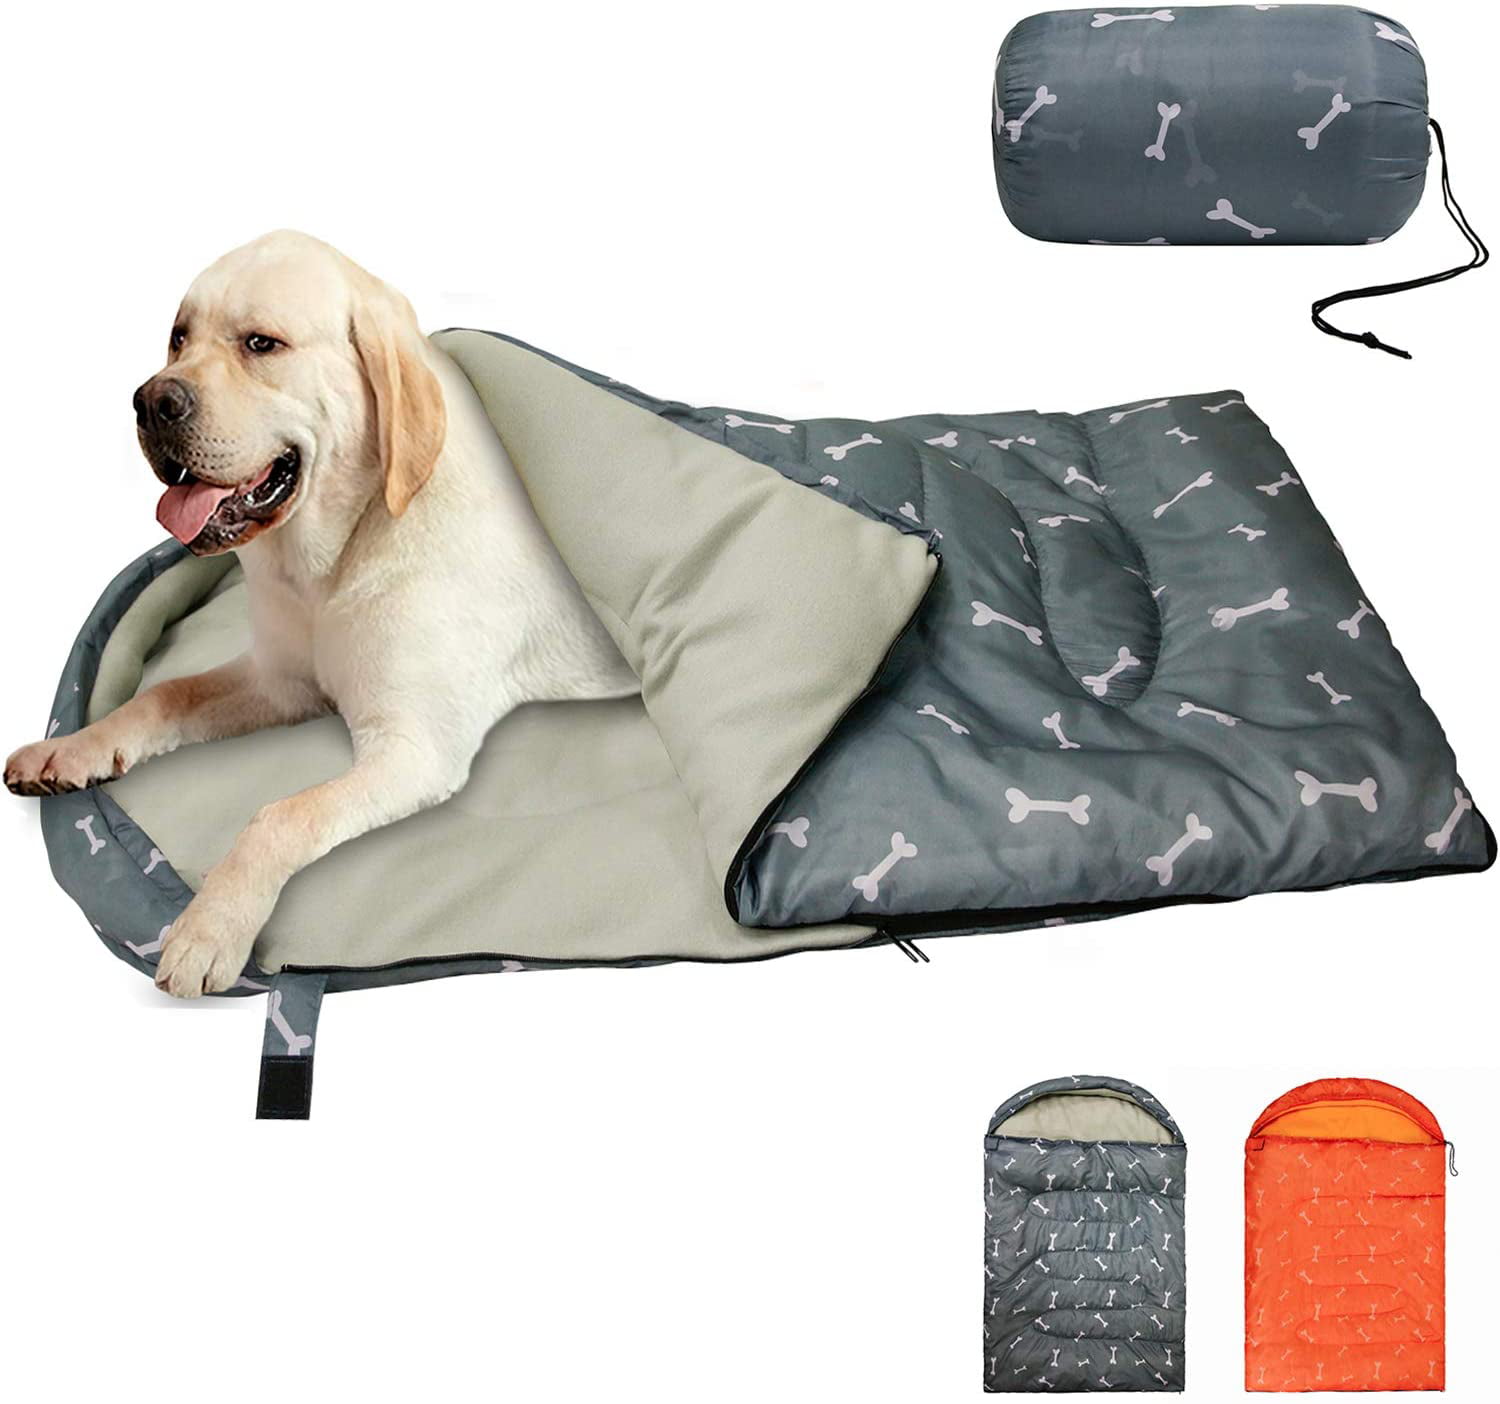 L, wine red Warm Soft Pet Bed Sleeping Bag Portable Dog Bed Dog and Cat Sleeping Bag